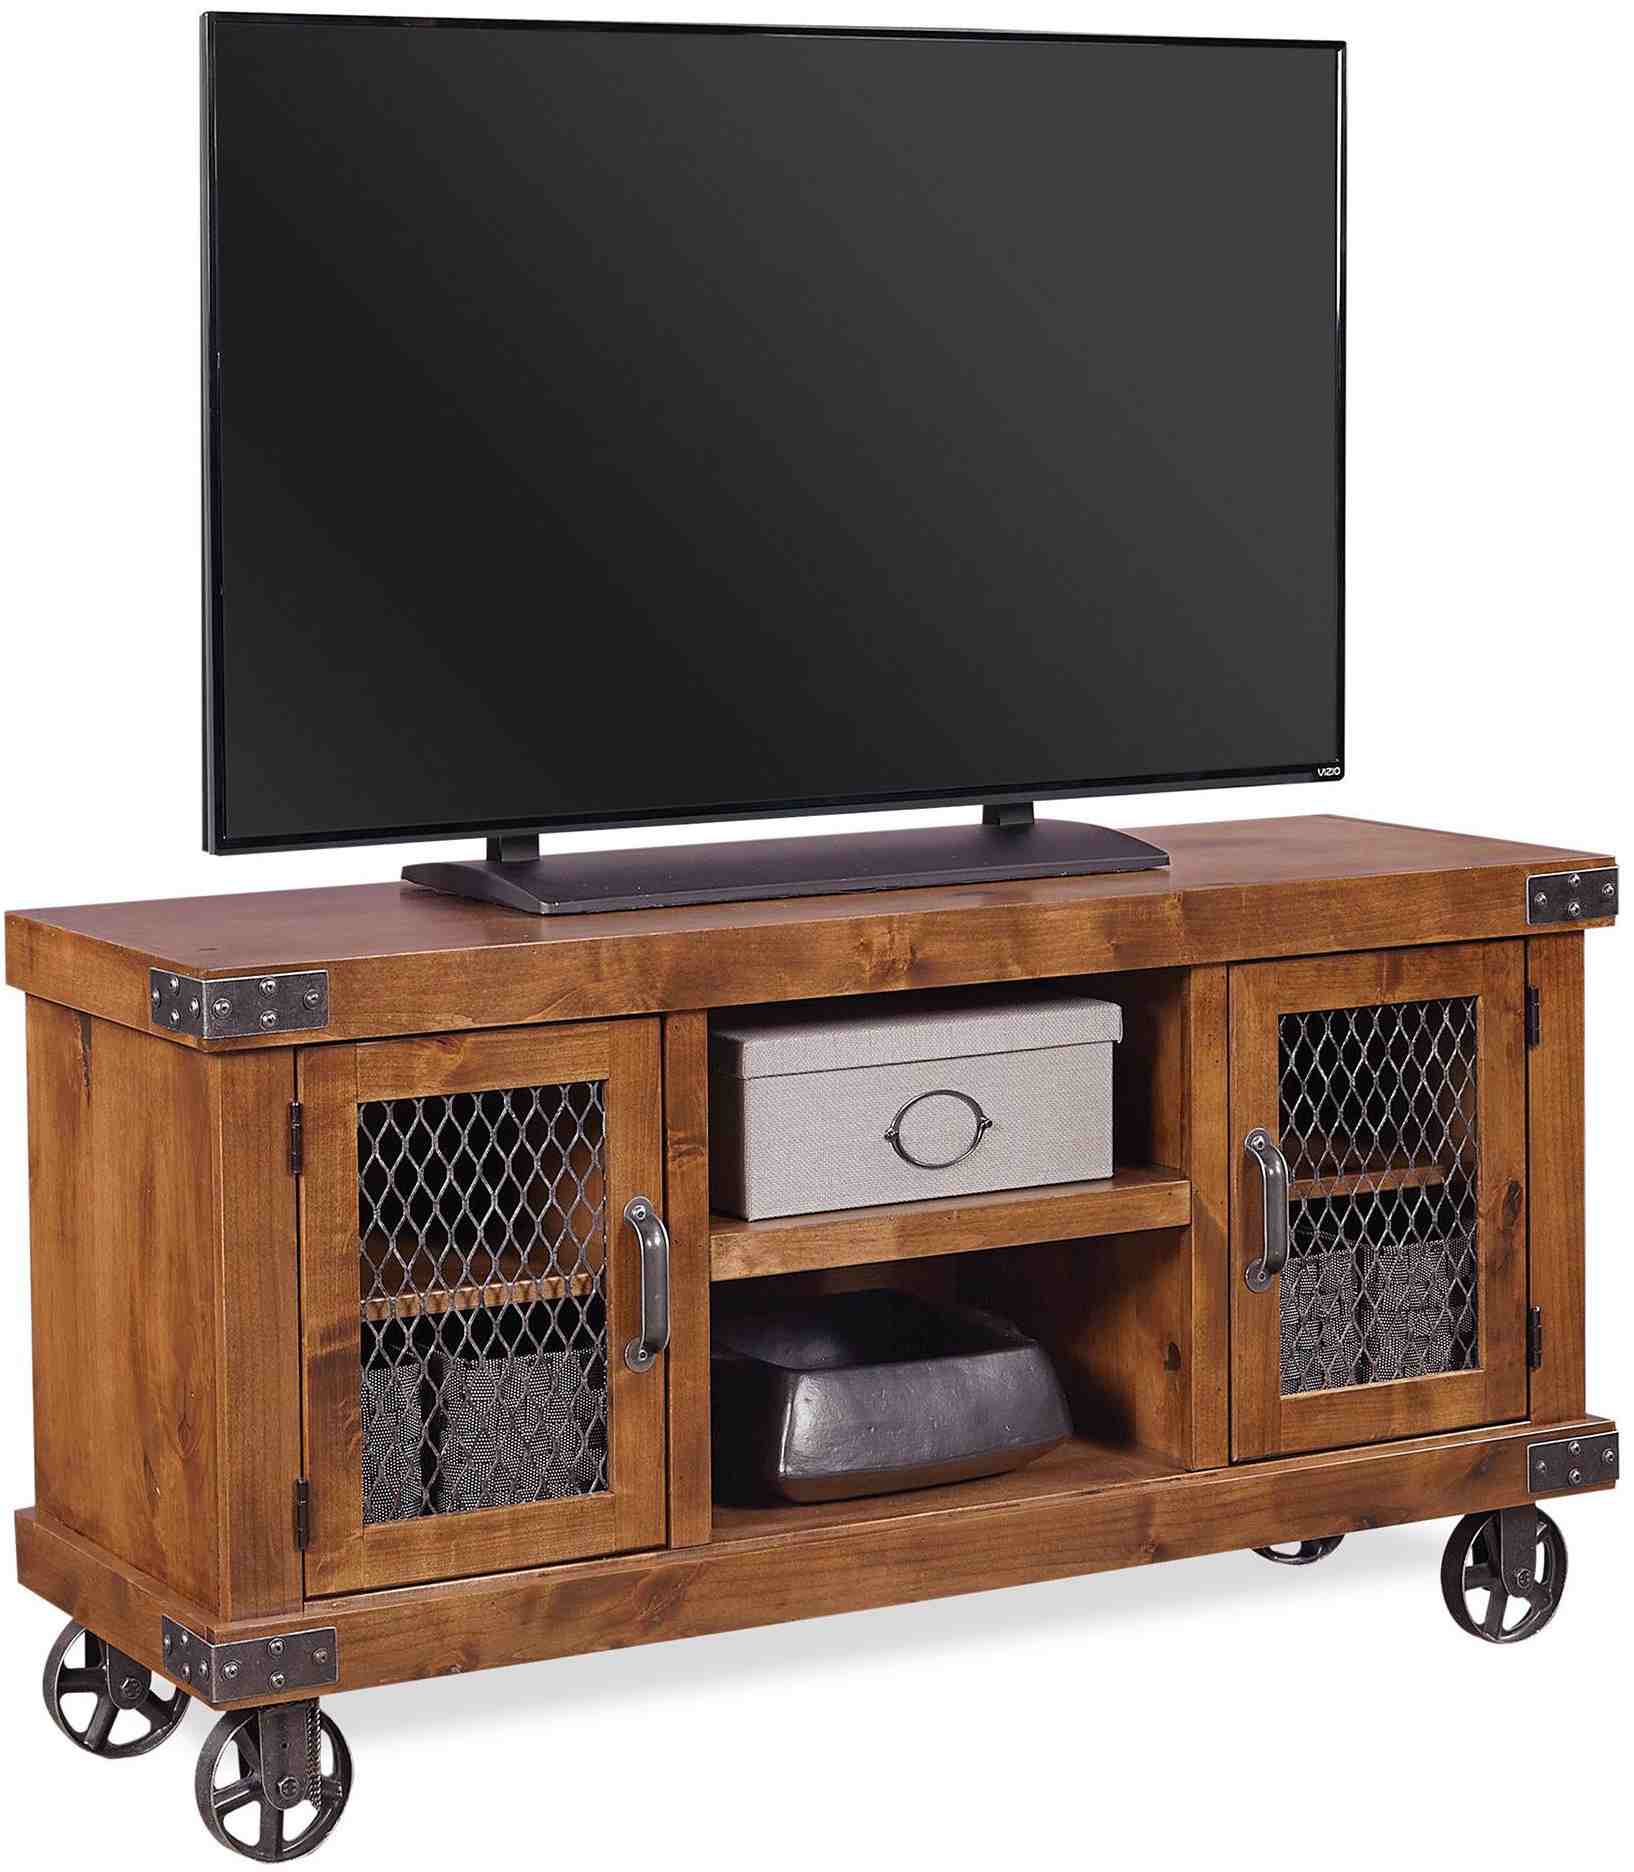 Aspenhome® Industrial Fruitwood 55" Console